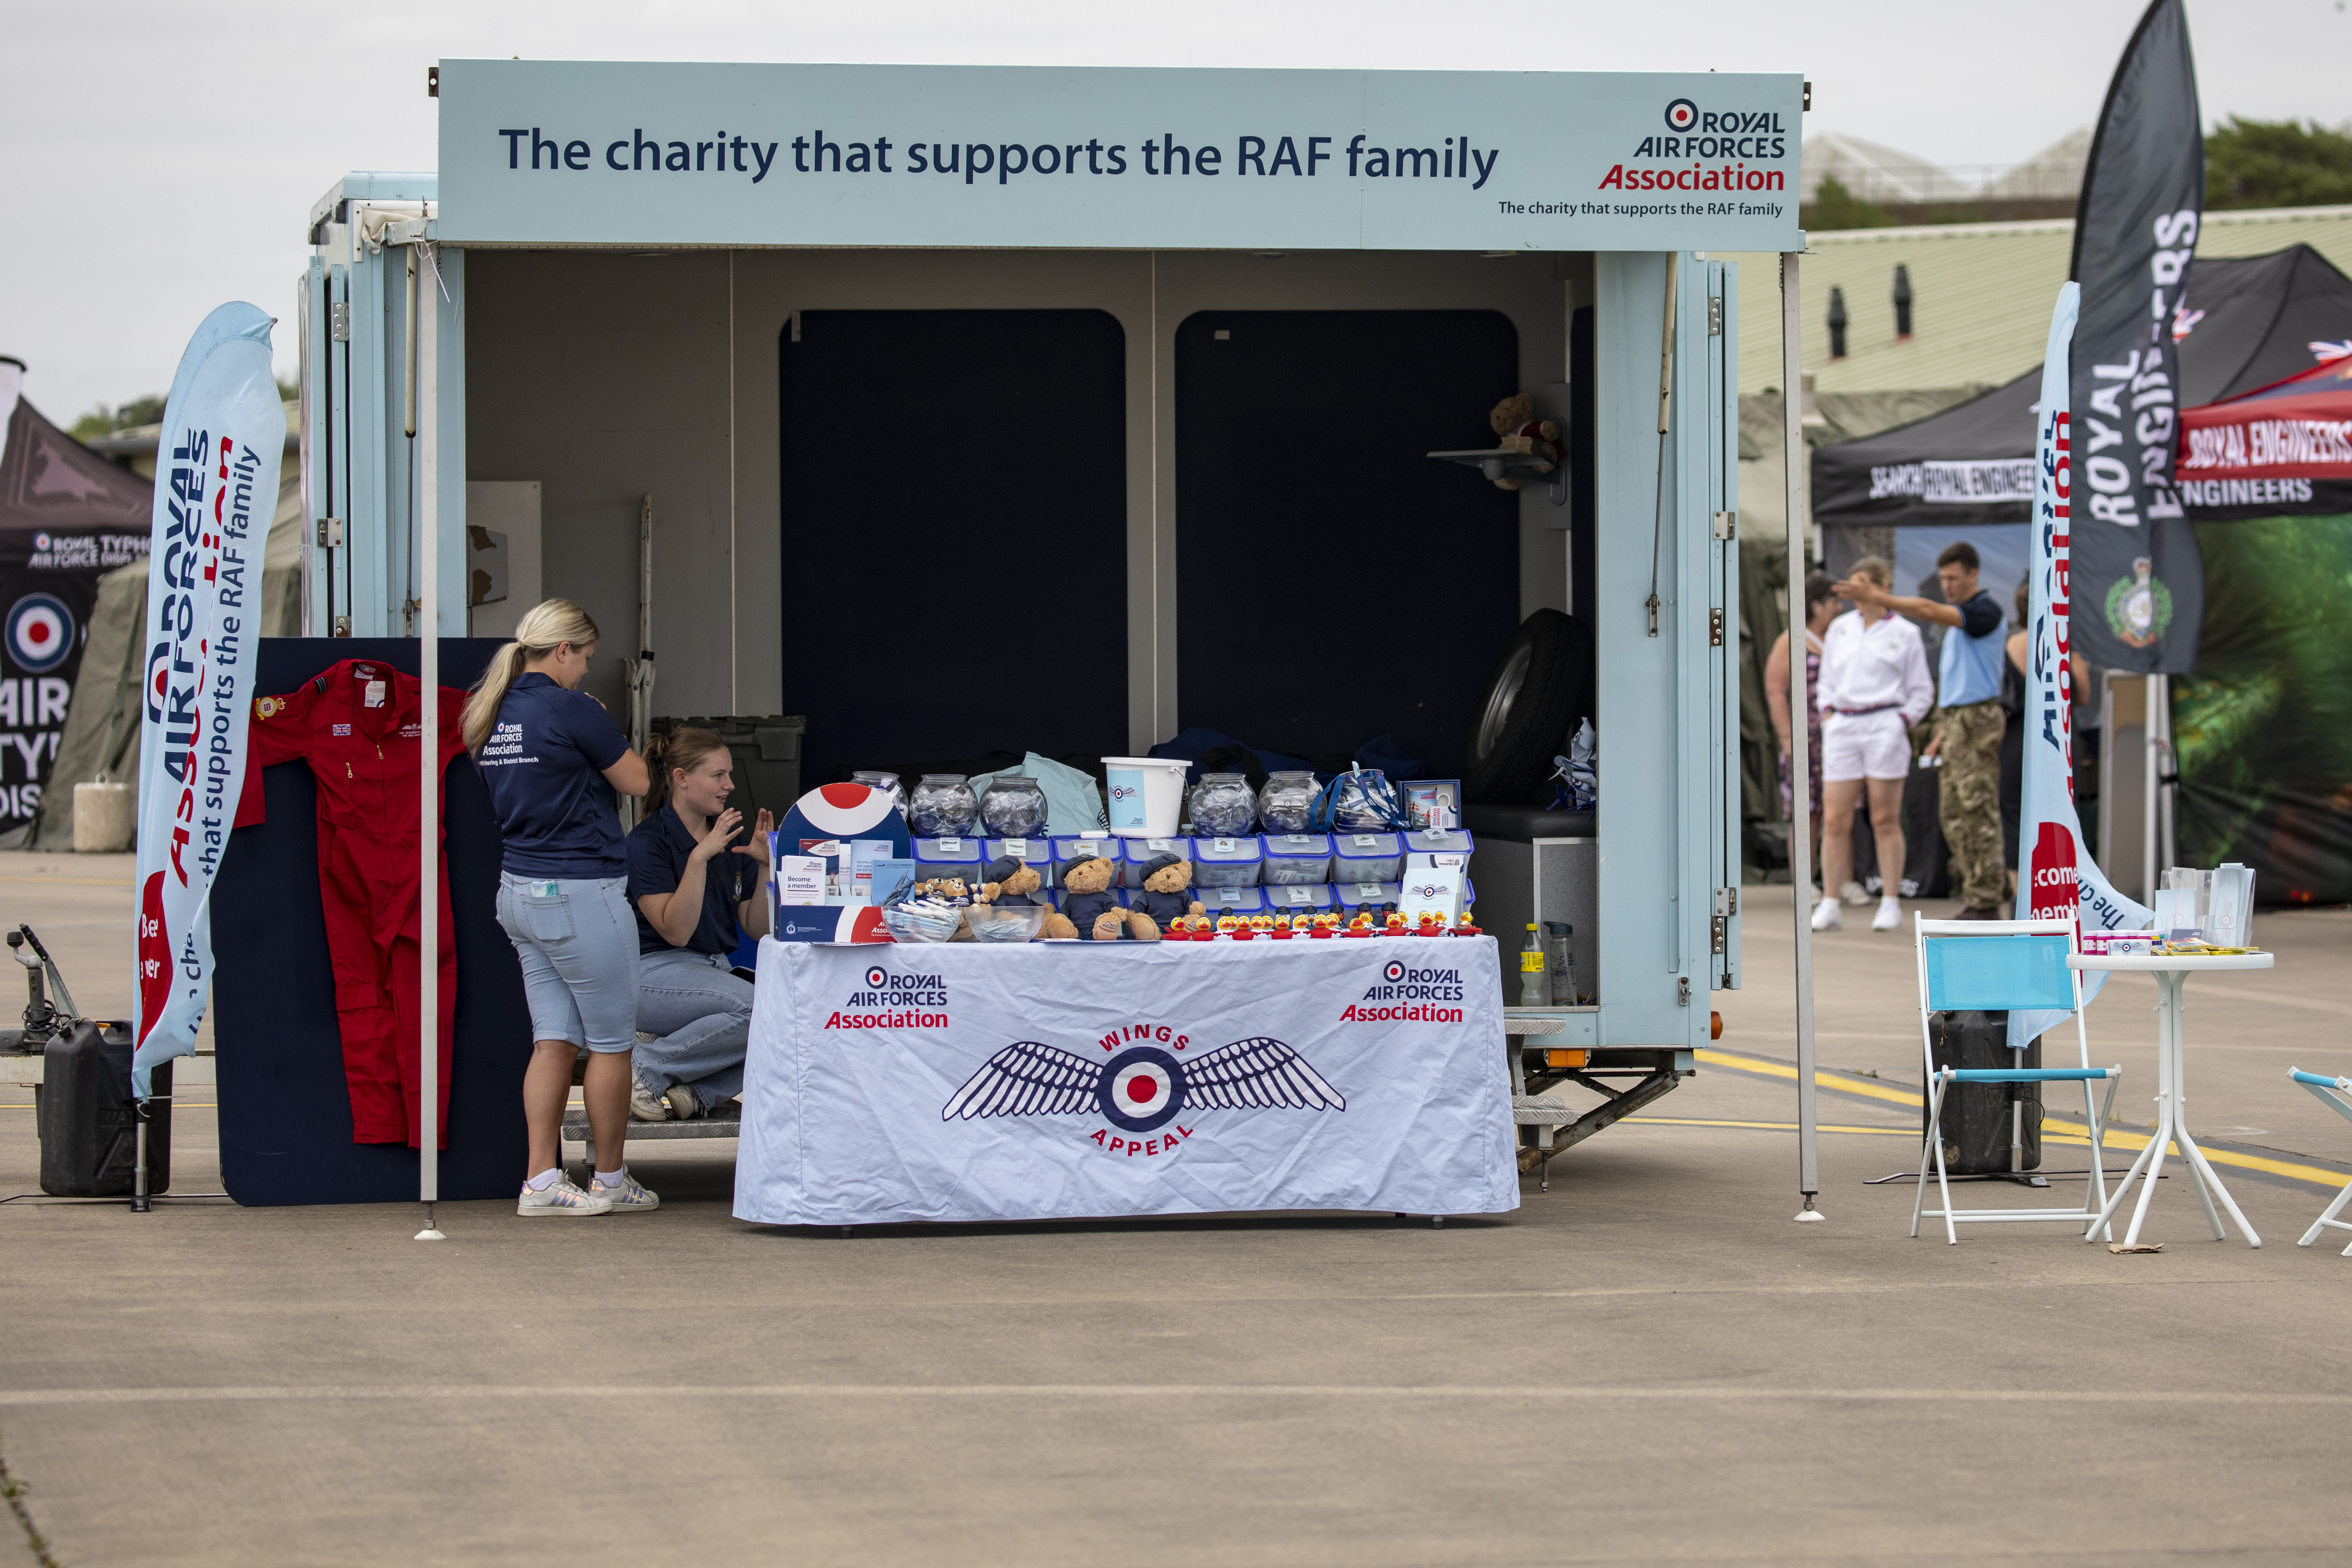 The RAFA stall at RAF Wittering Families’ Day